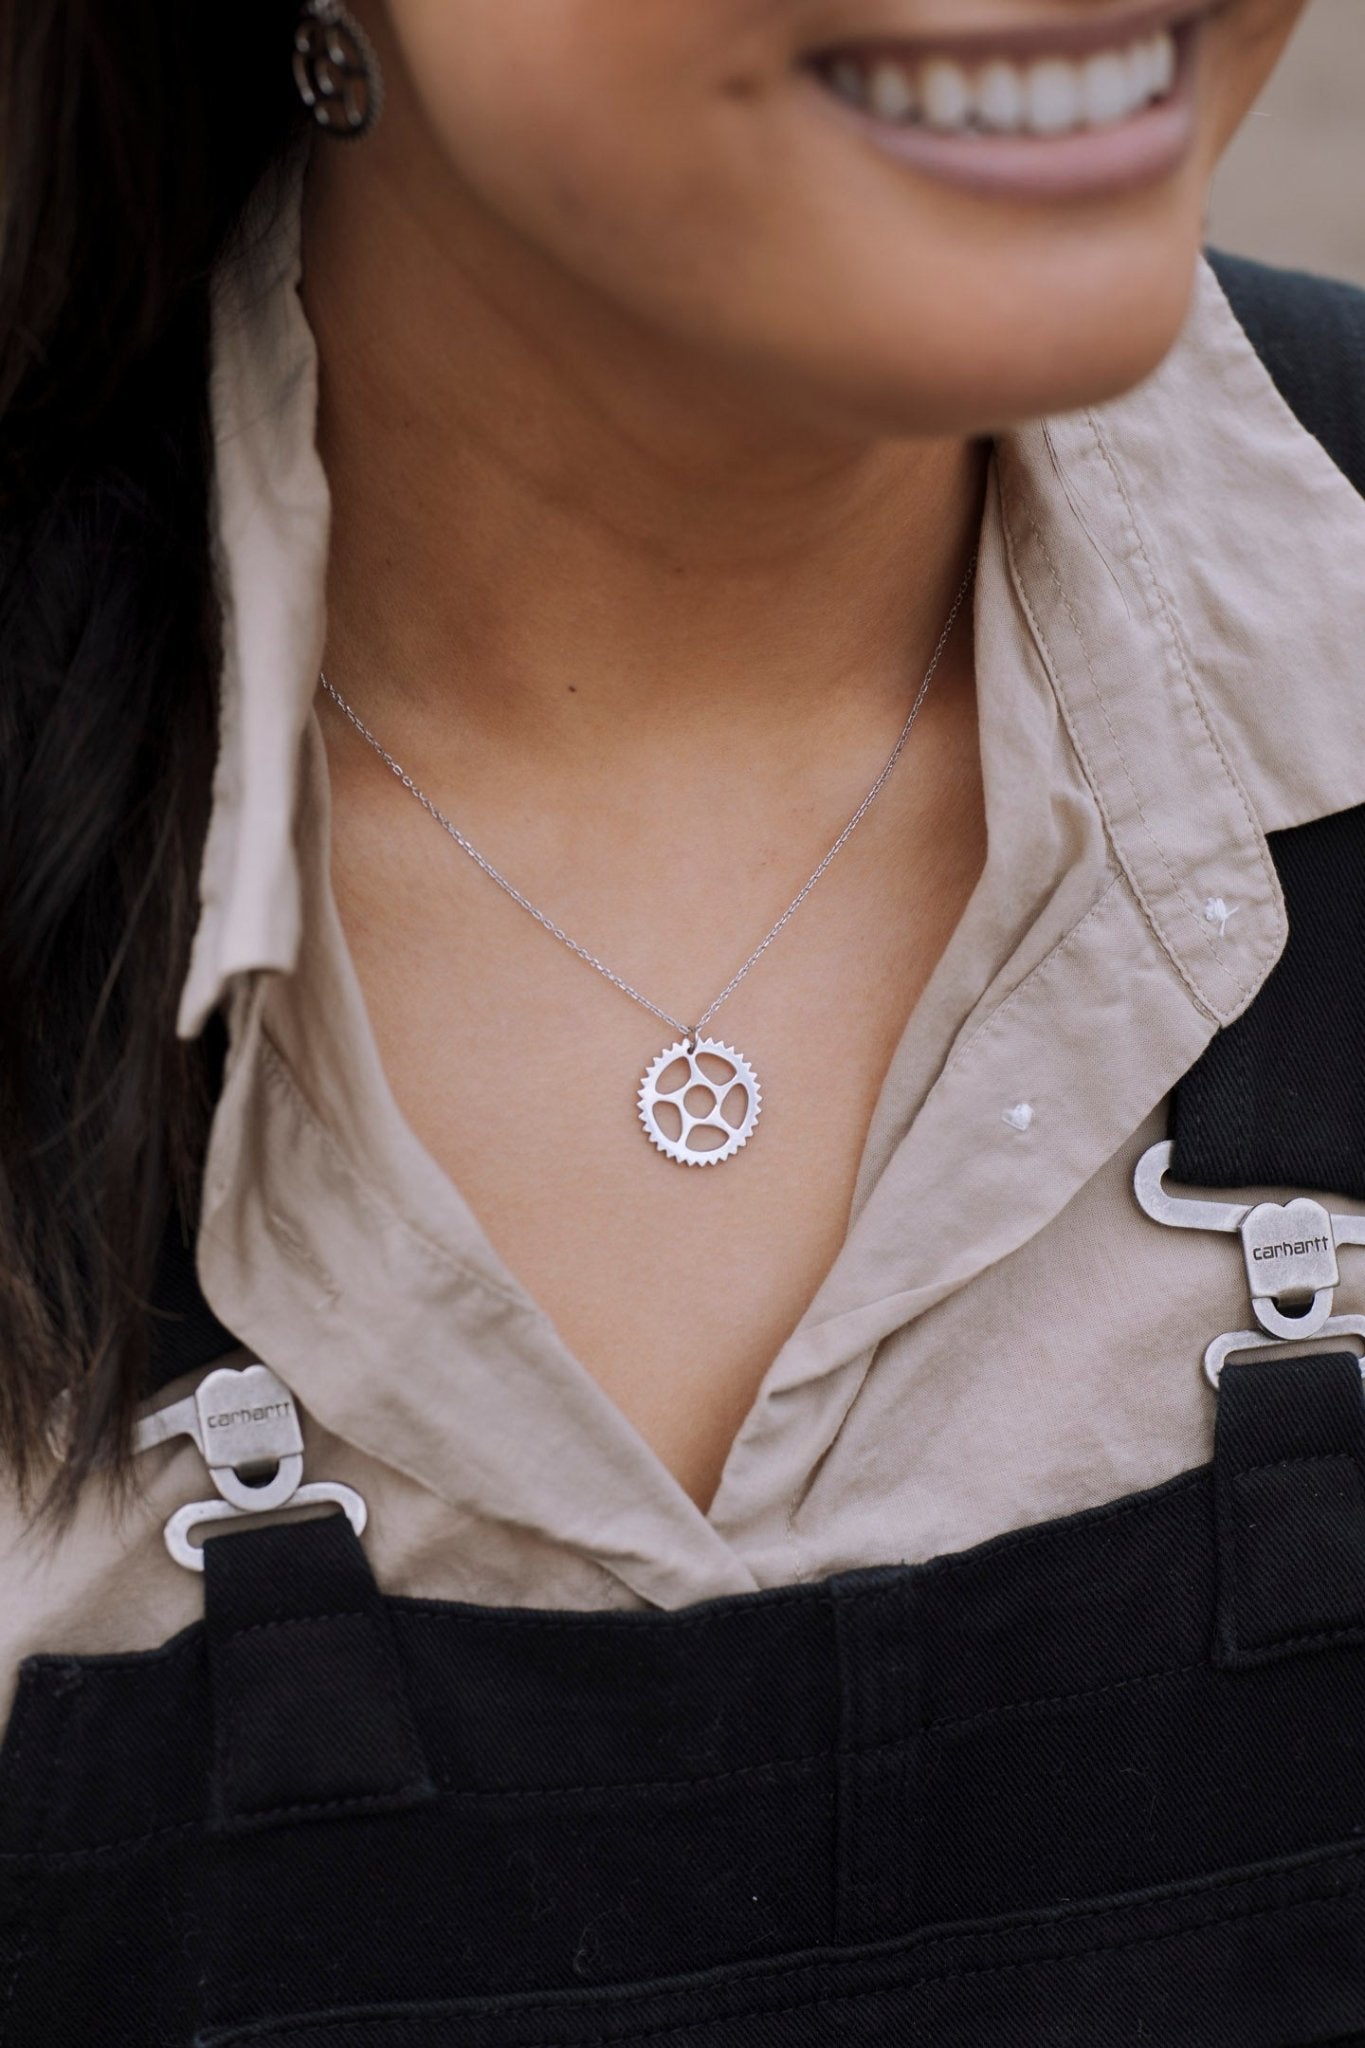 model wearing a 925 sterling silver bike chain ring design pendant necklace close up